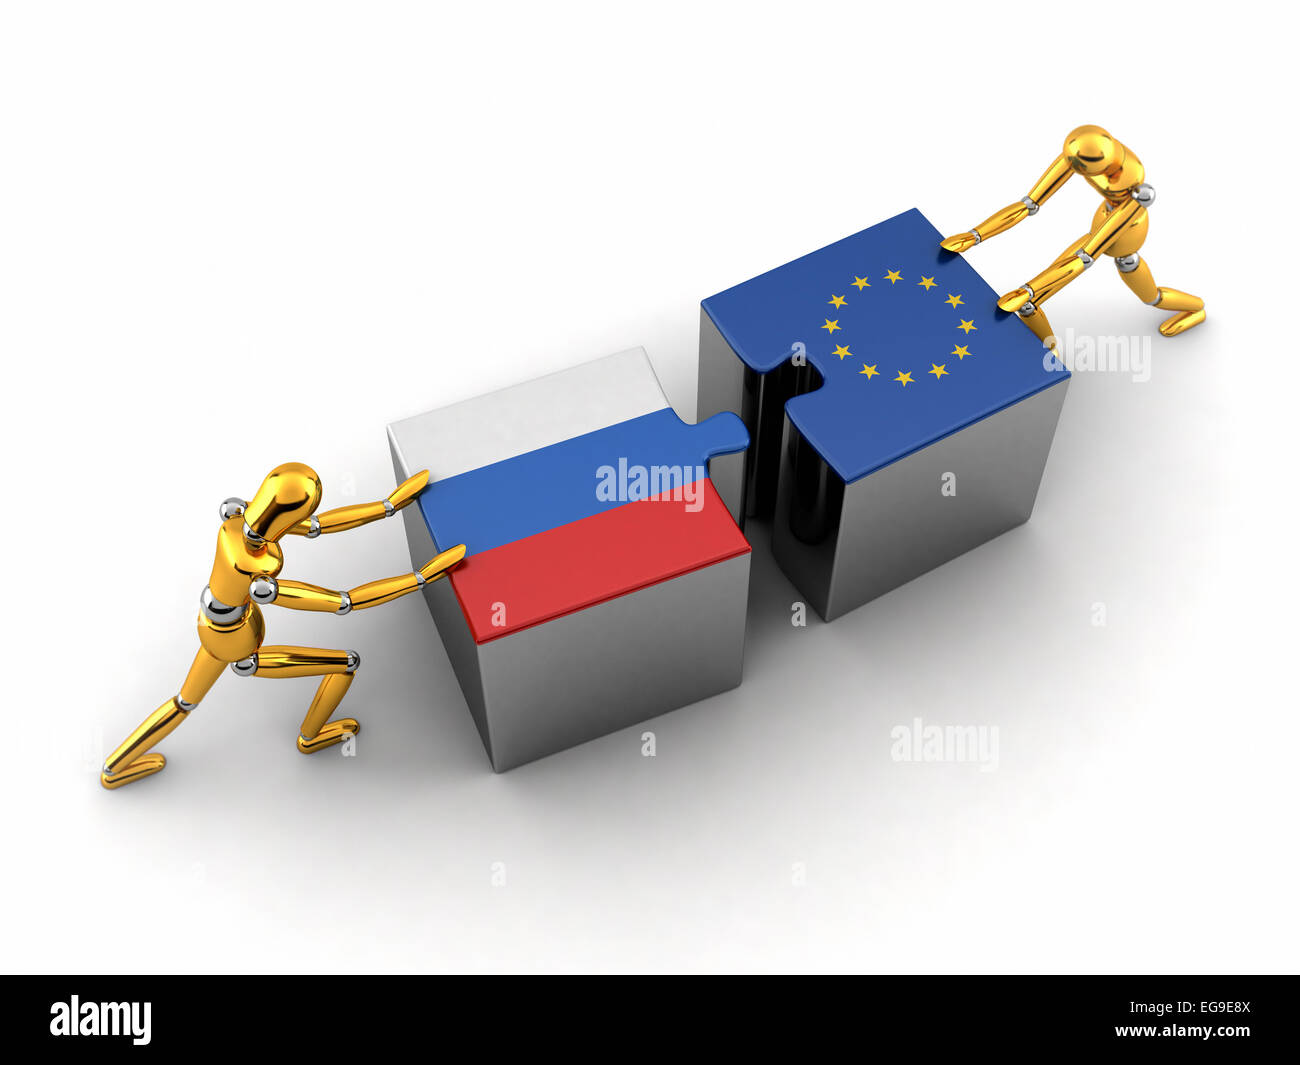 Political or financial concept of Russia struggling and finding a solution with the European union. Stock Photo